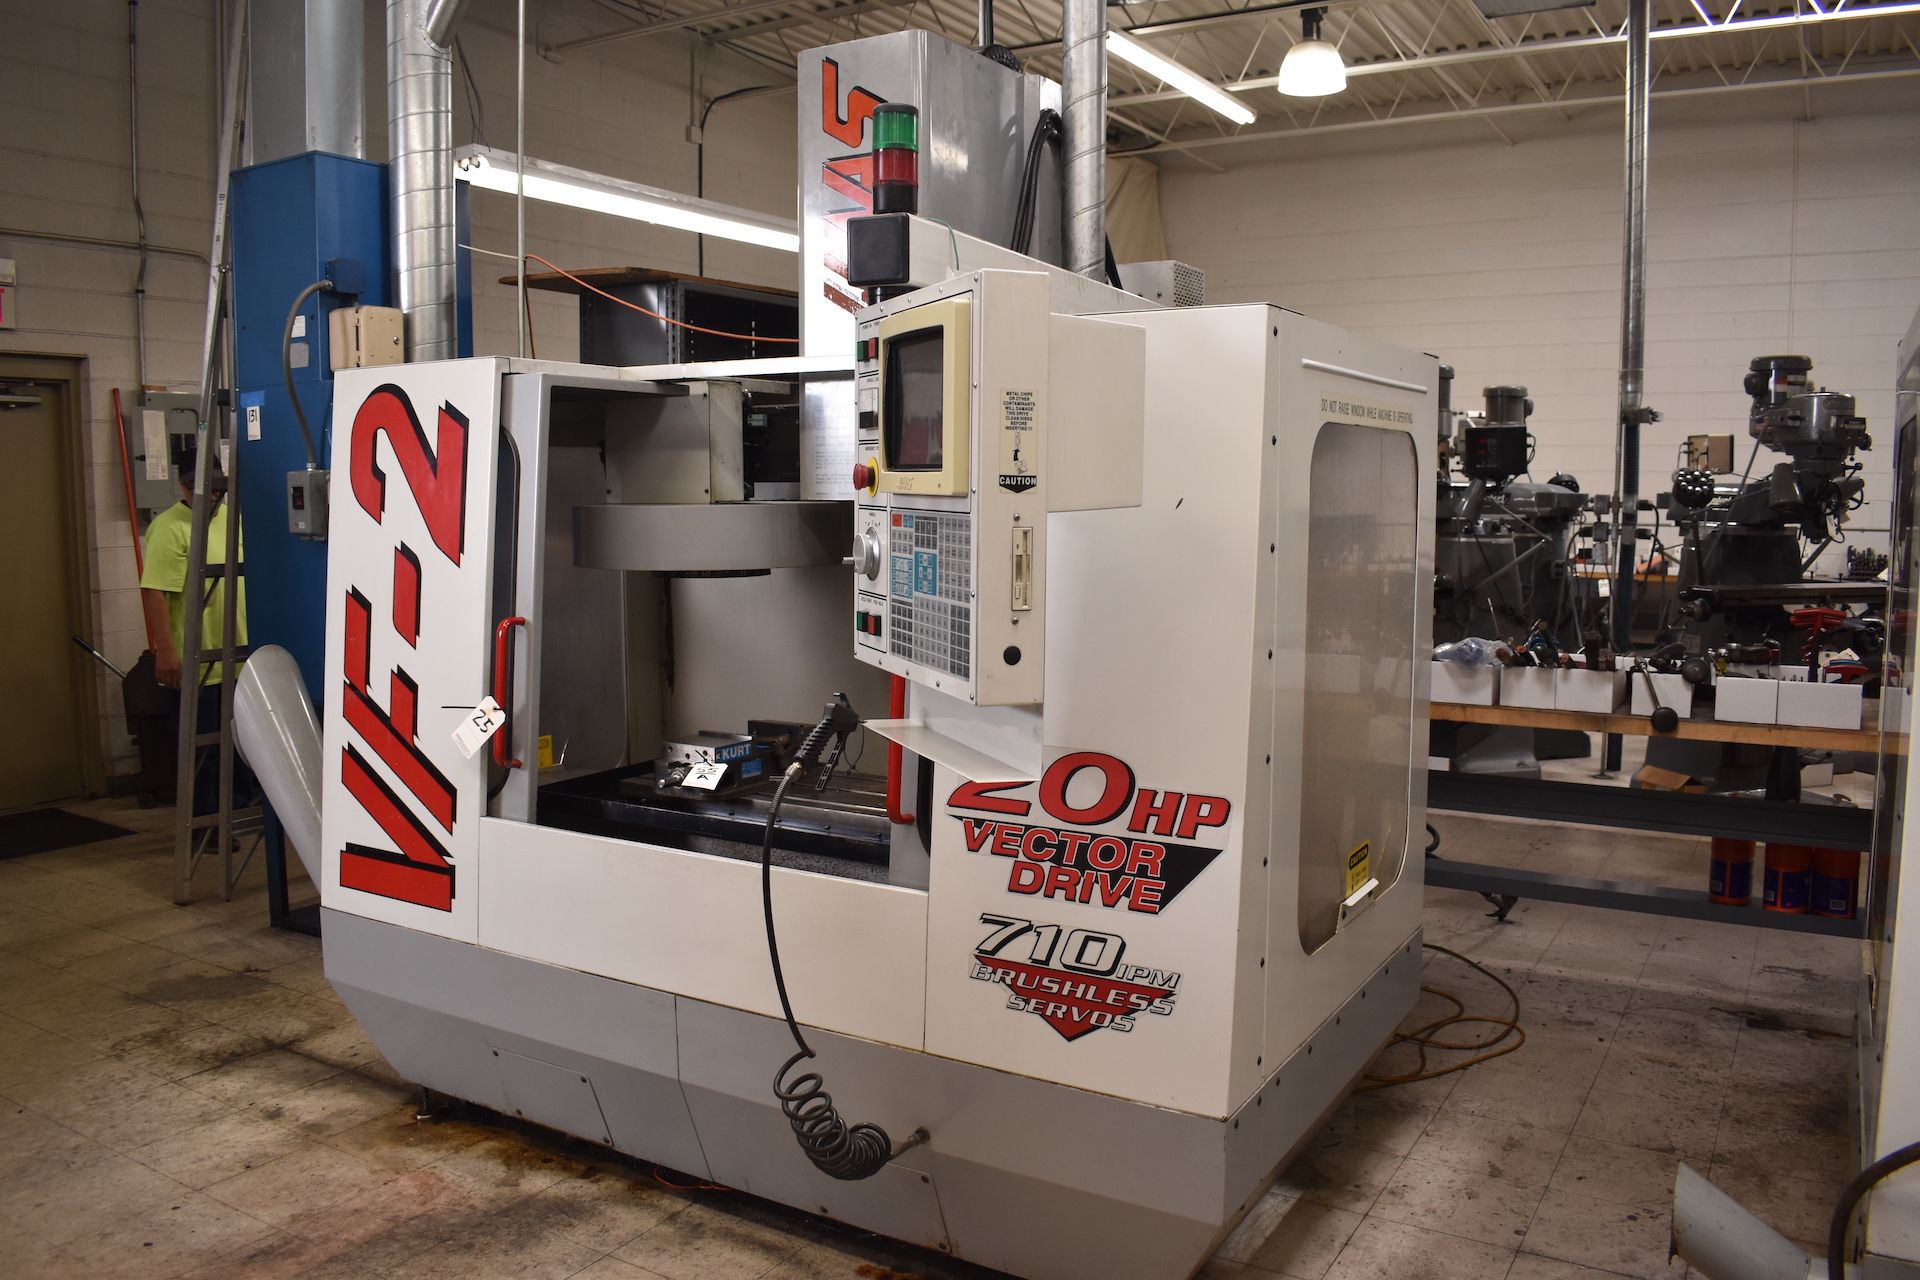 Haas Model VF-2 CNC Vertical Machining Center, S/N 13527 (1998), 20 HP Vector Drive, 710 IPM - Image 3 of 15